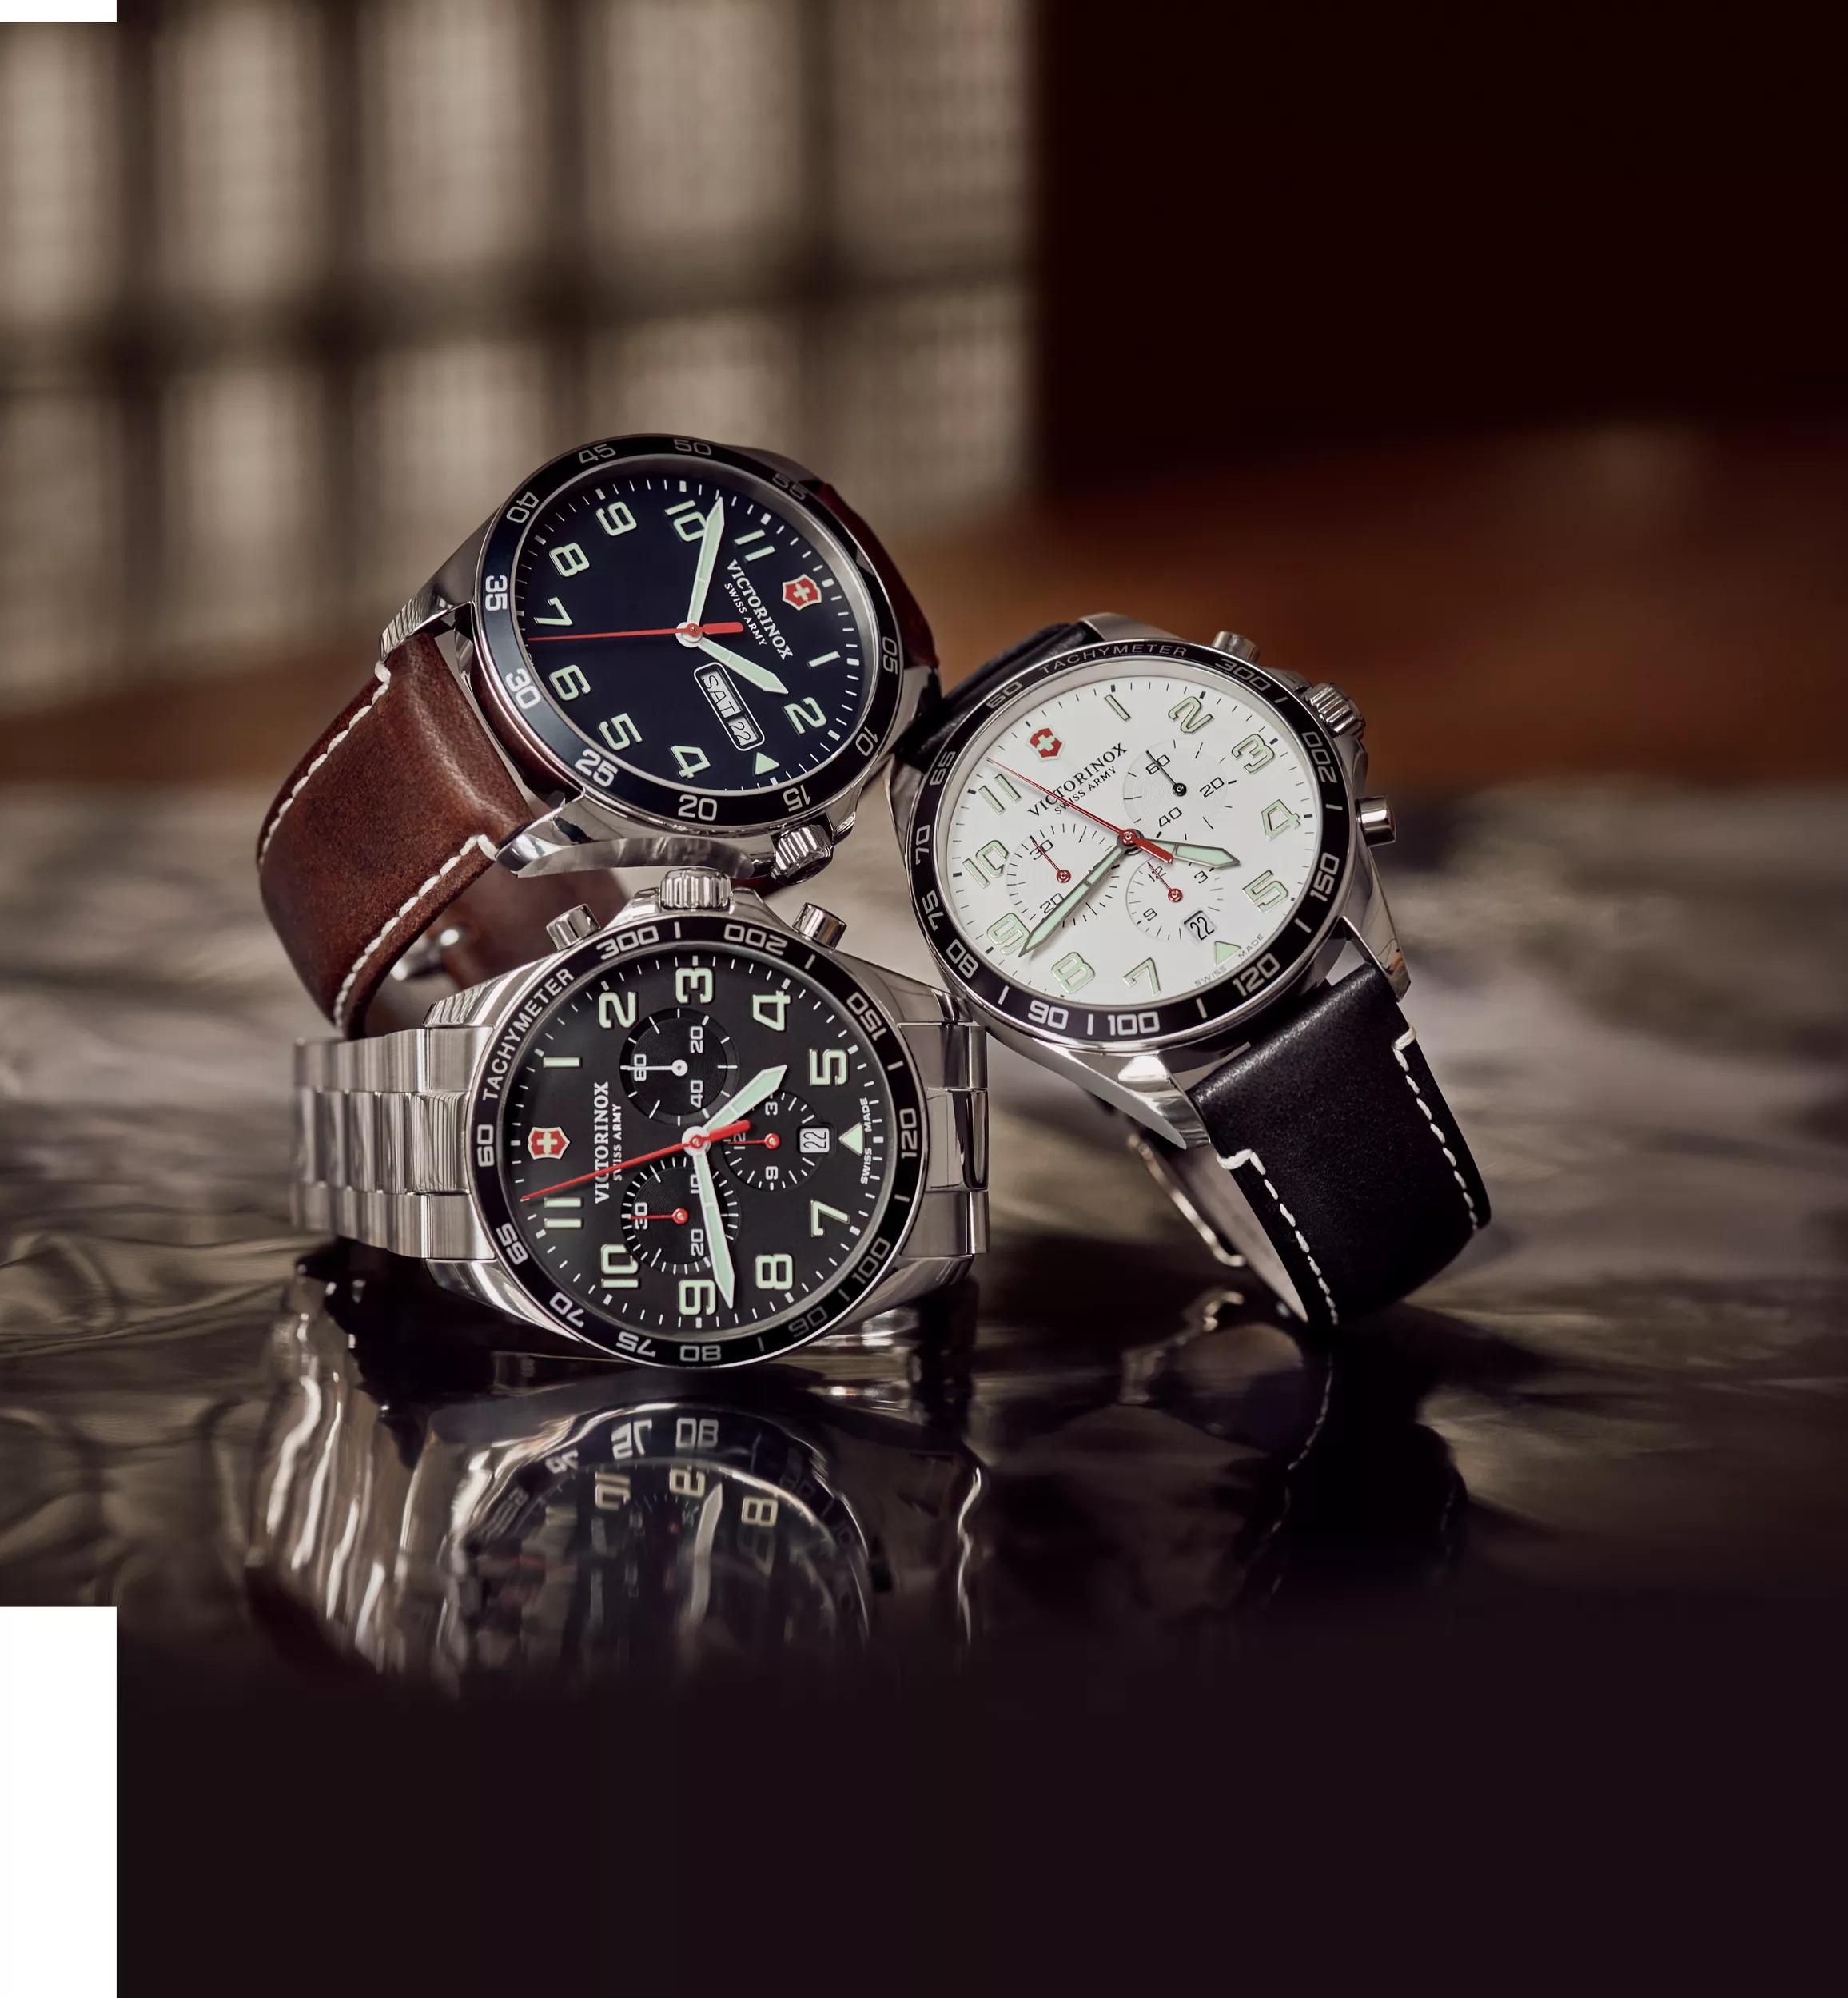 timepieces_collection_WAT-C2628-hero-banner-image